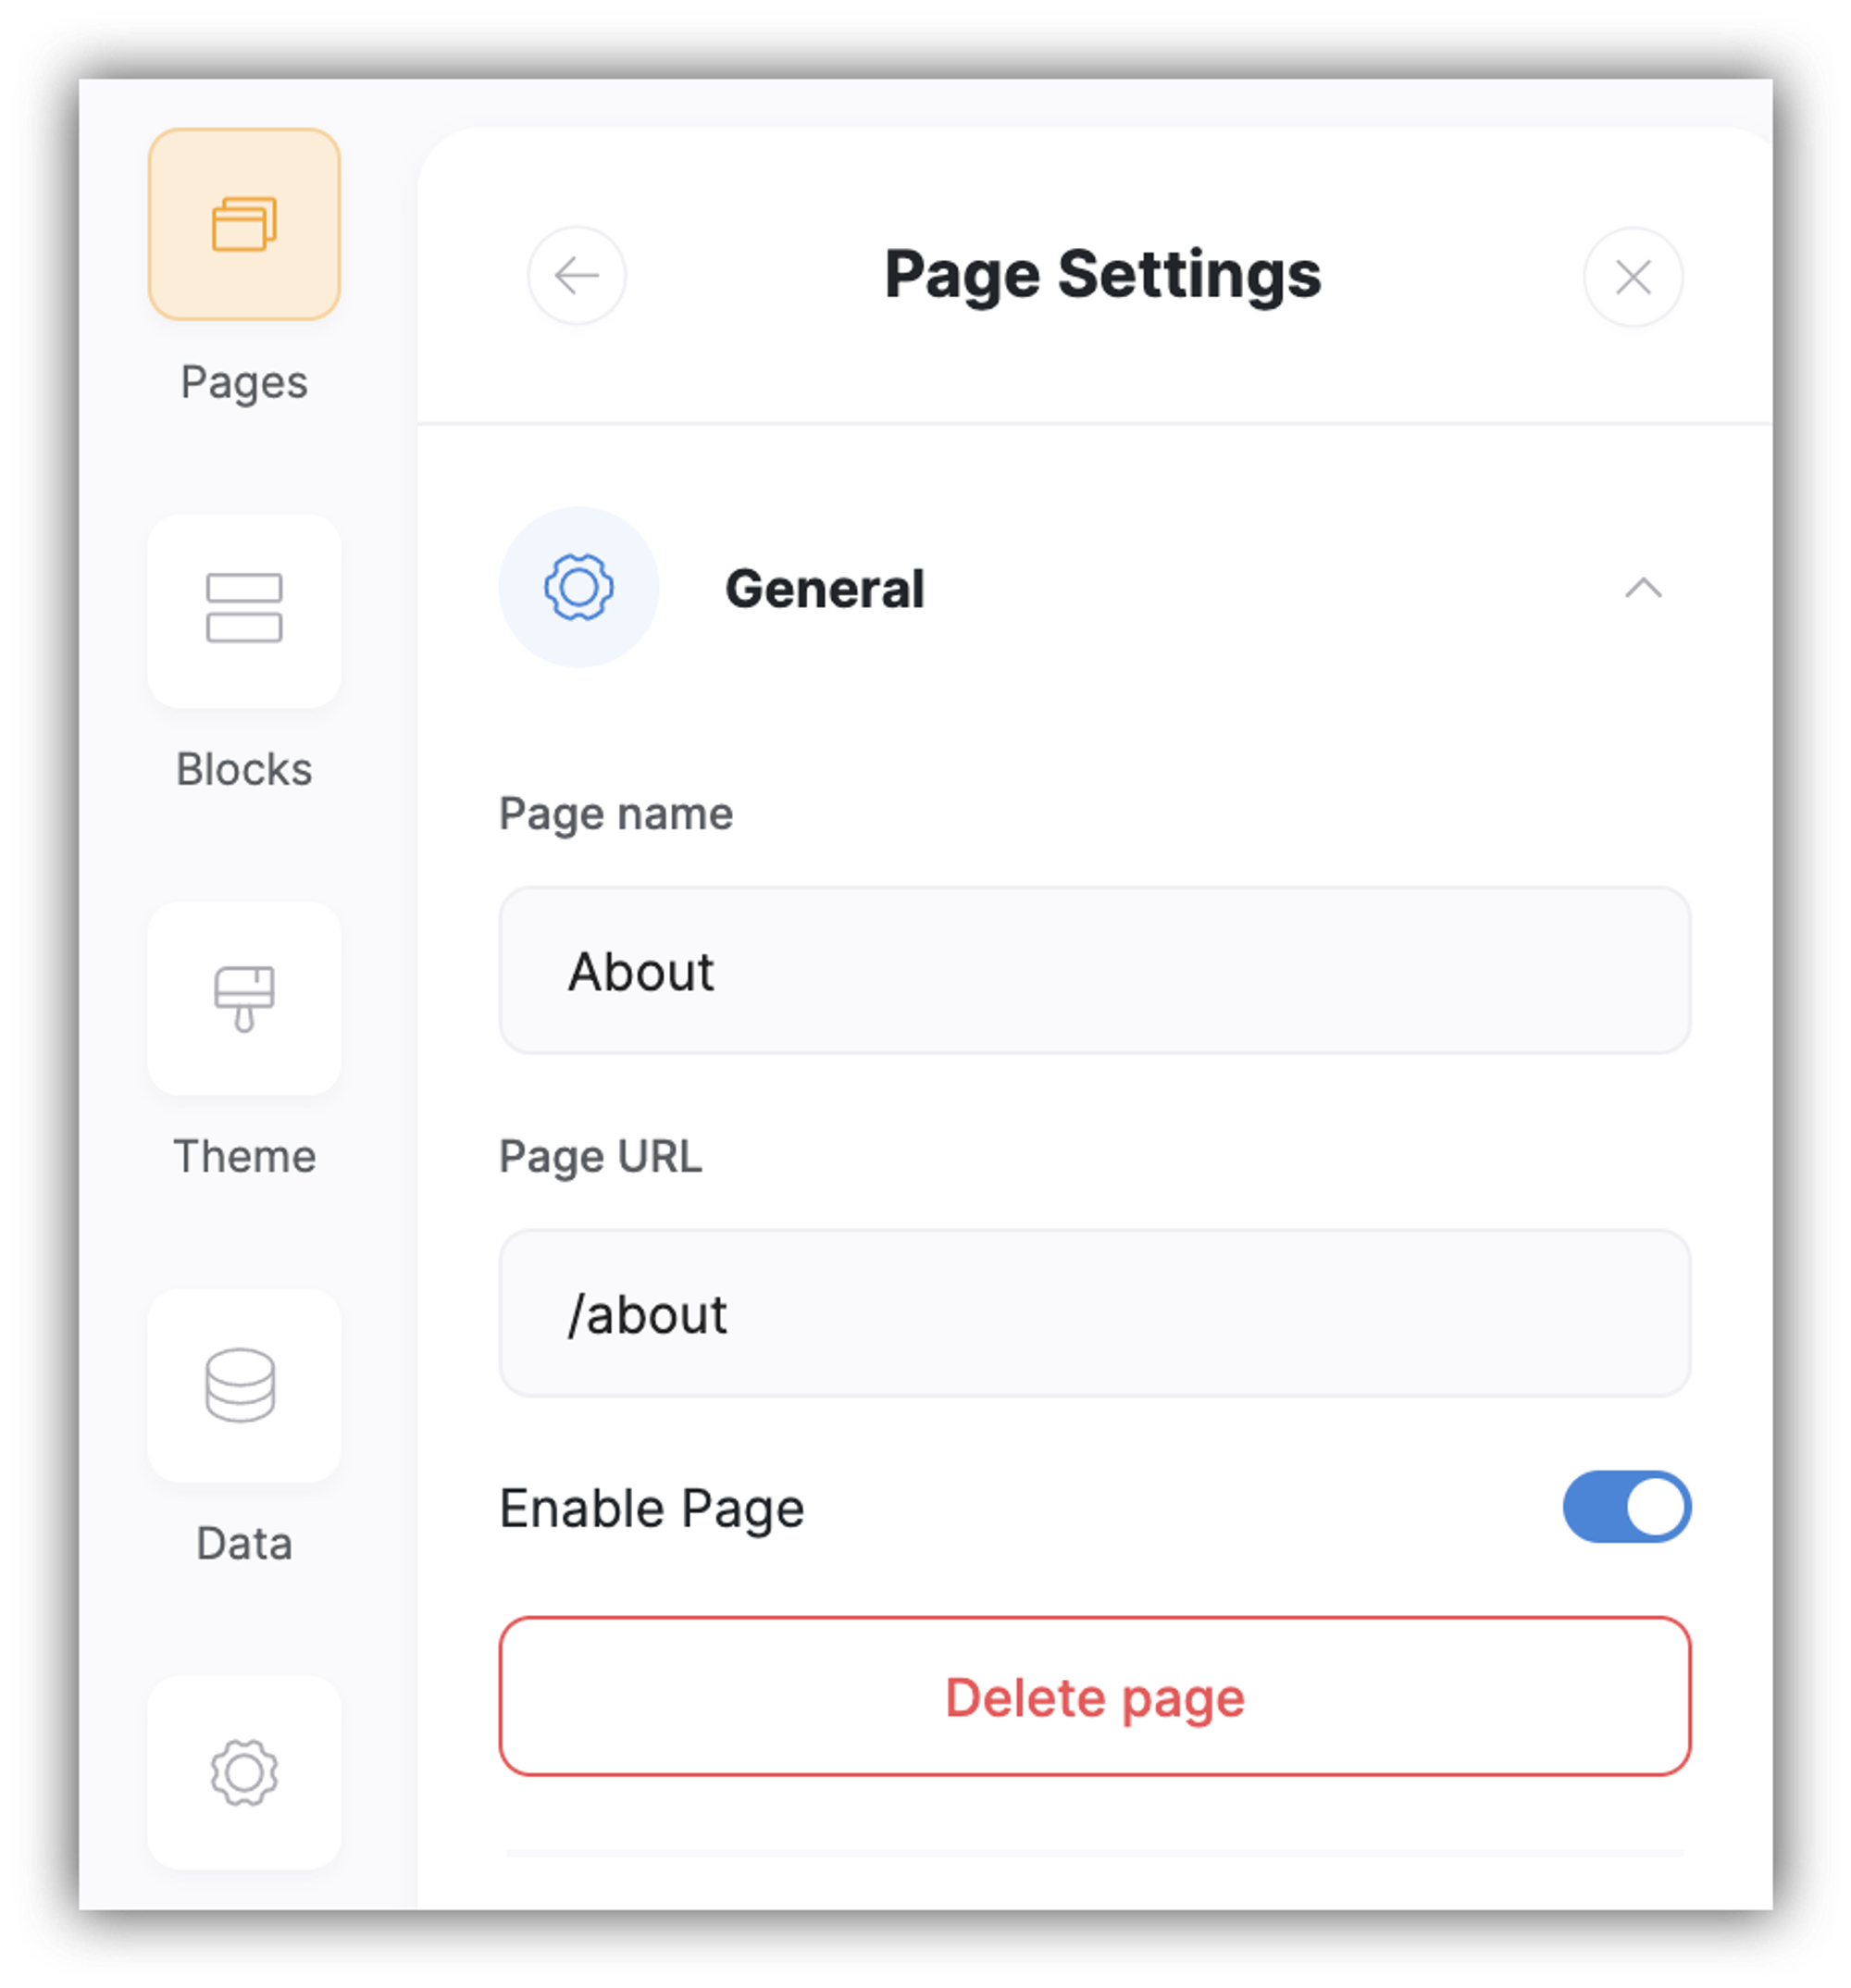 General page settings